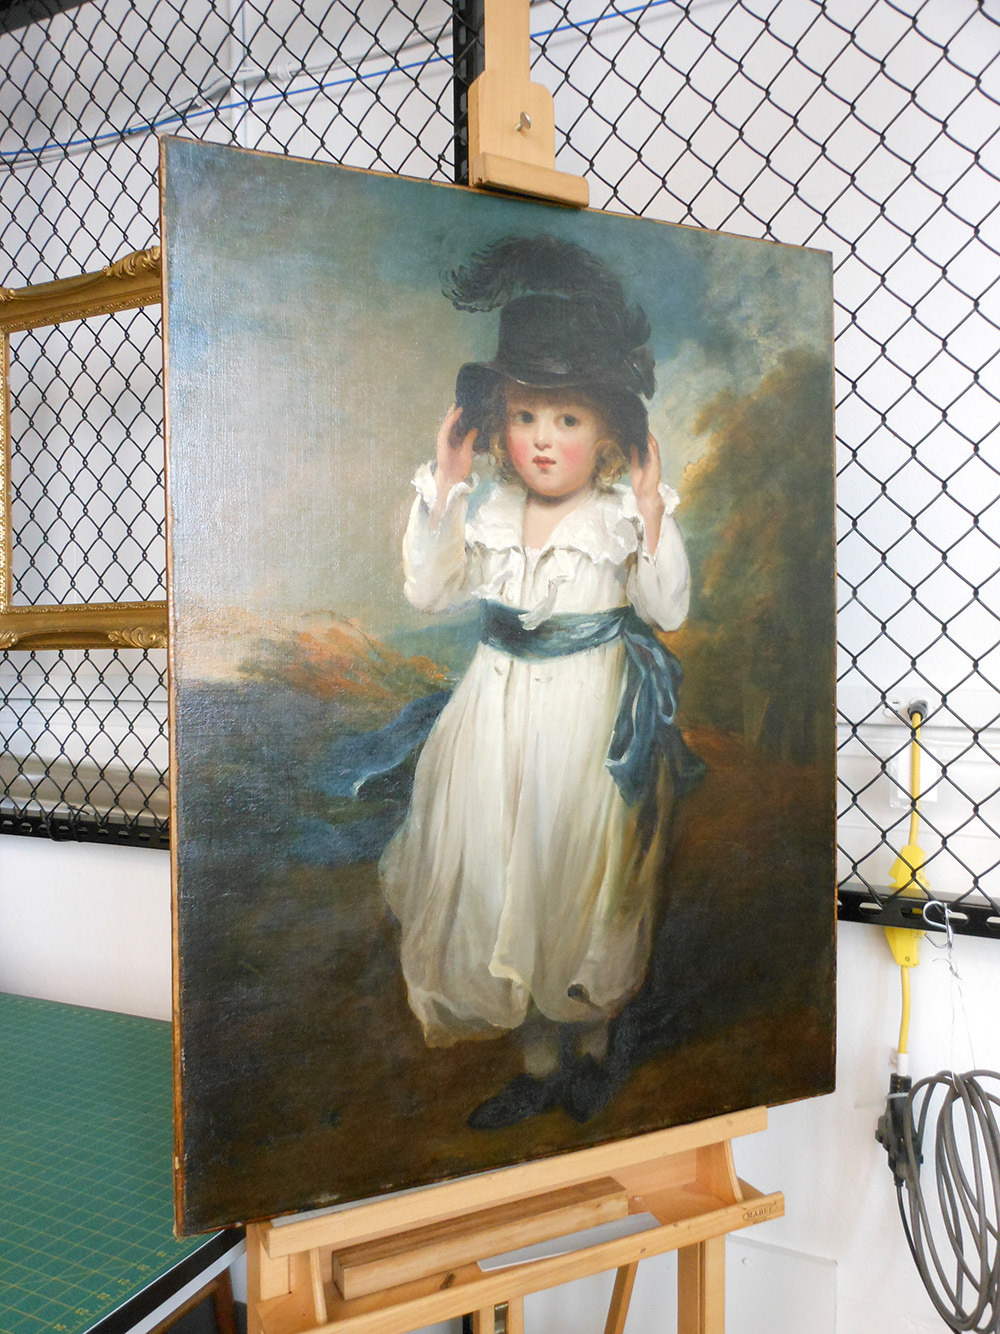 The painting, fully conserved. The painting is no longer grimy.